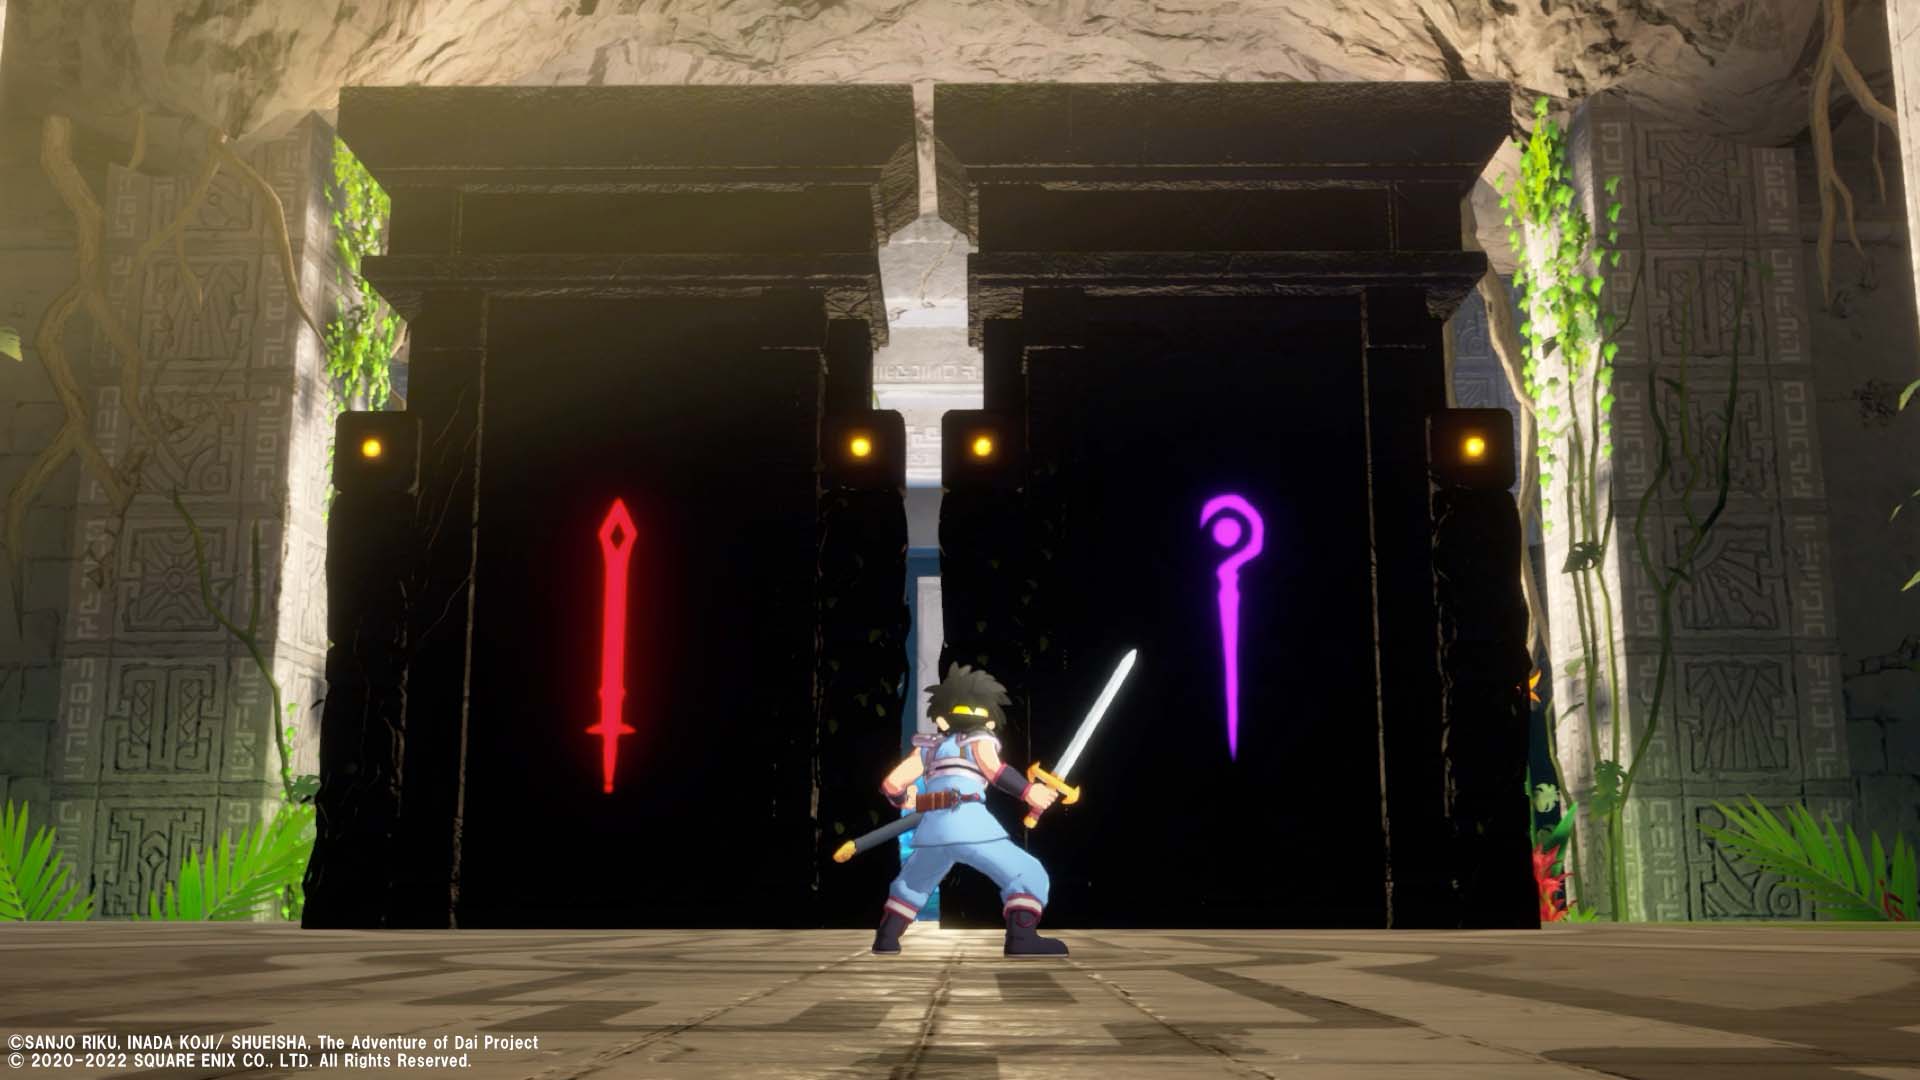 Review  Infinity Strash: Dragon Quest The Adventure of Dai